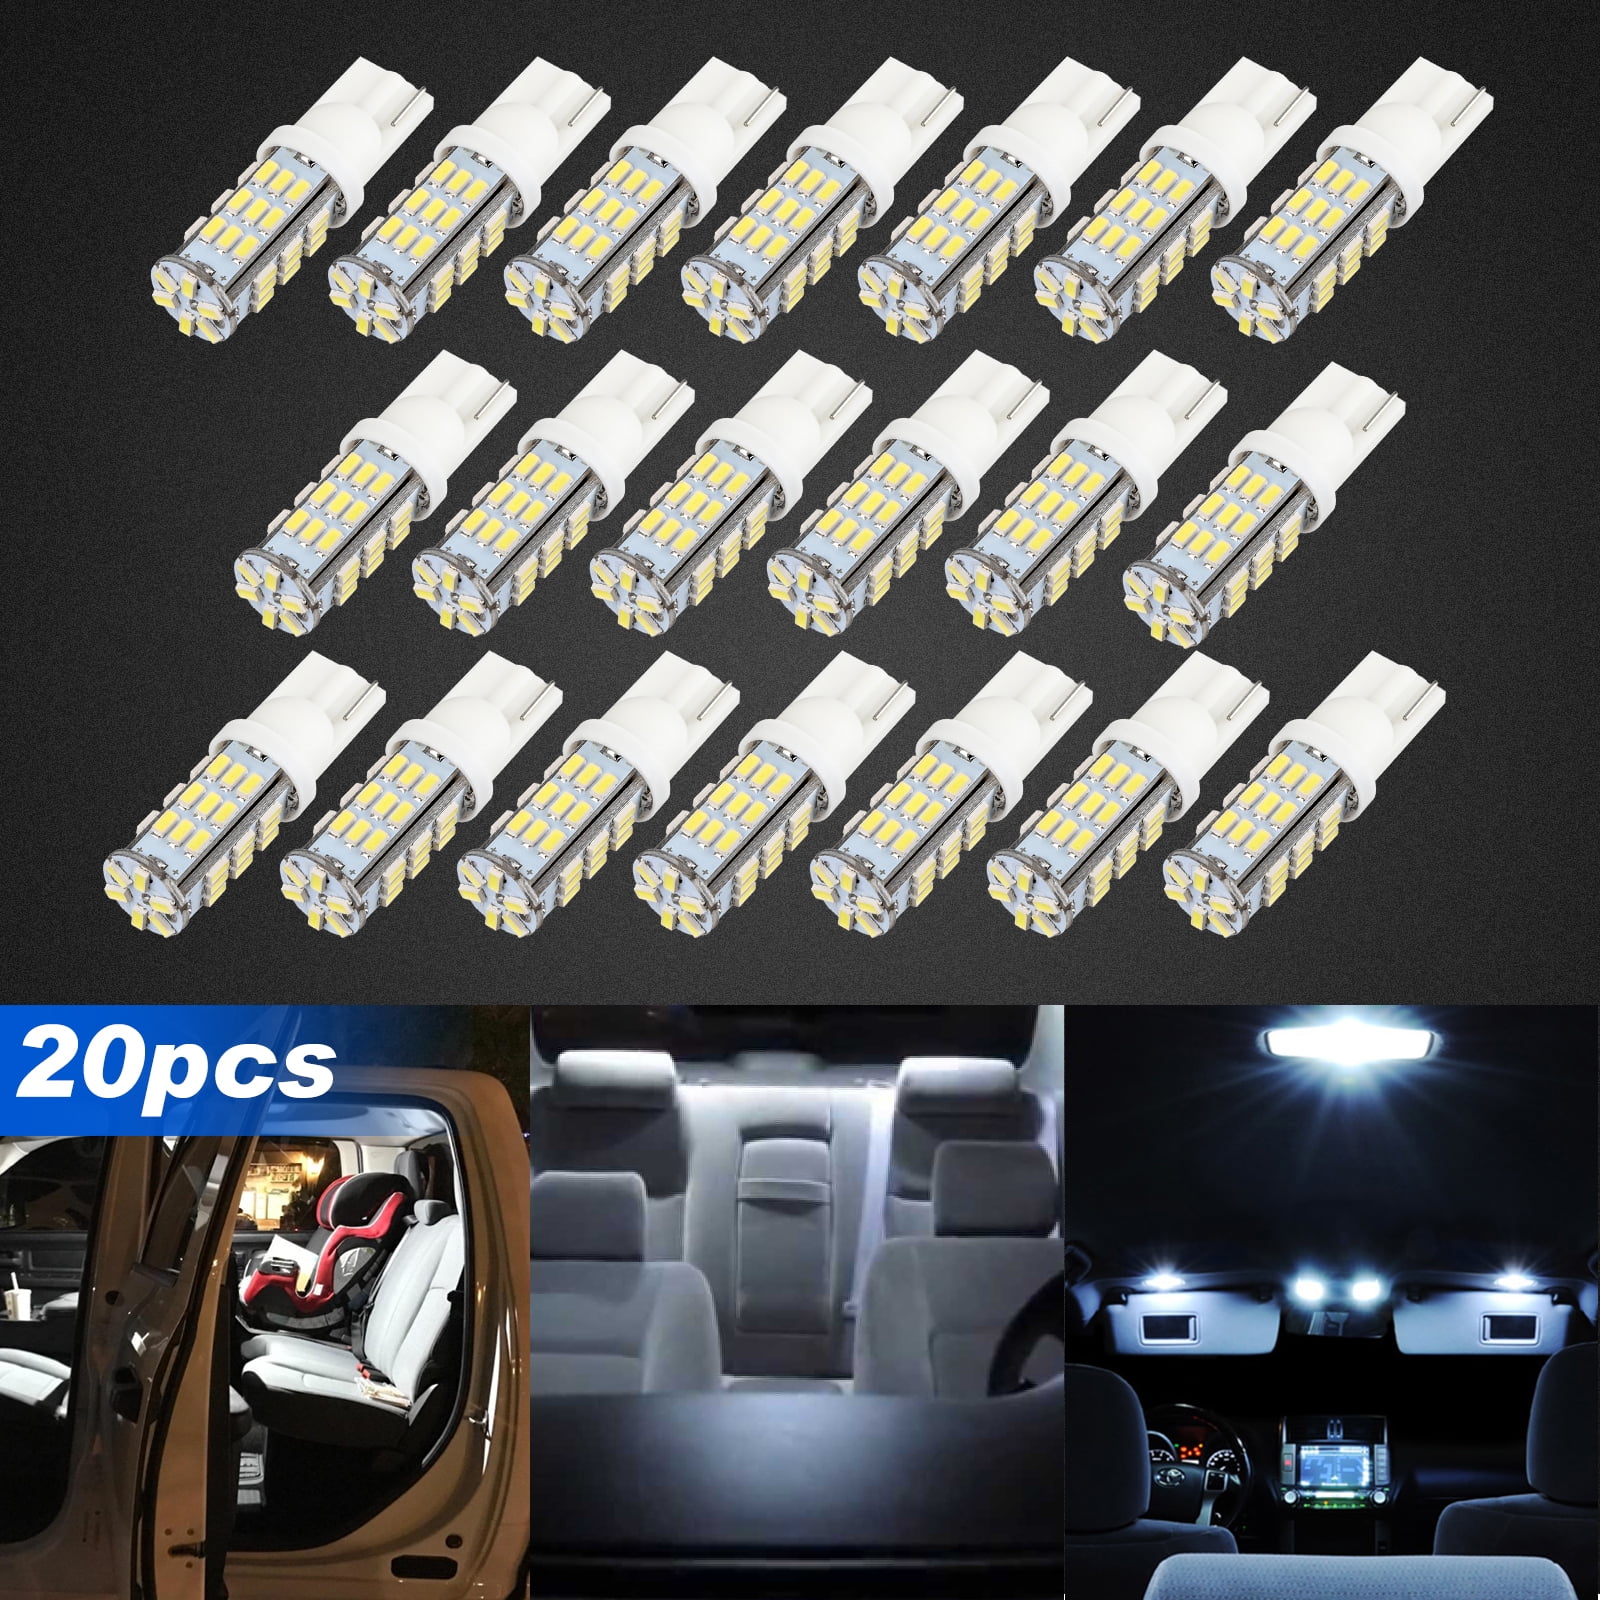 Pack of 10 194 T10 LED Light Bulb 6500K White On Sale Extremely Bright 3030 Chipset 2SMD 168 2825 W5W 3030 Wedge Light 2W 12V LED Bulbs Error Free for Car Dome Map Door Courtesy License Plate Light